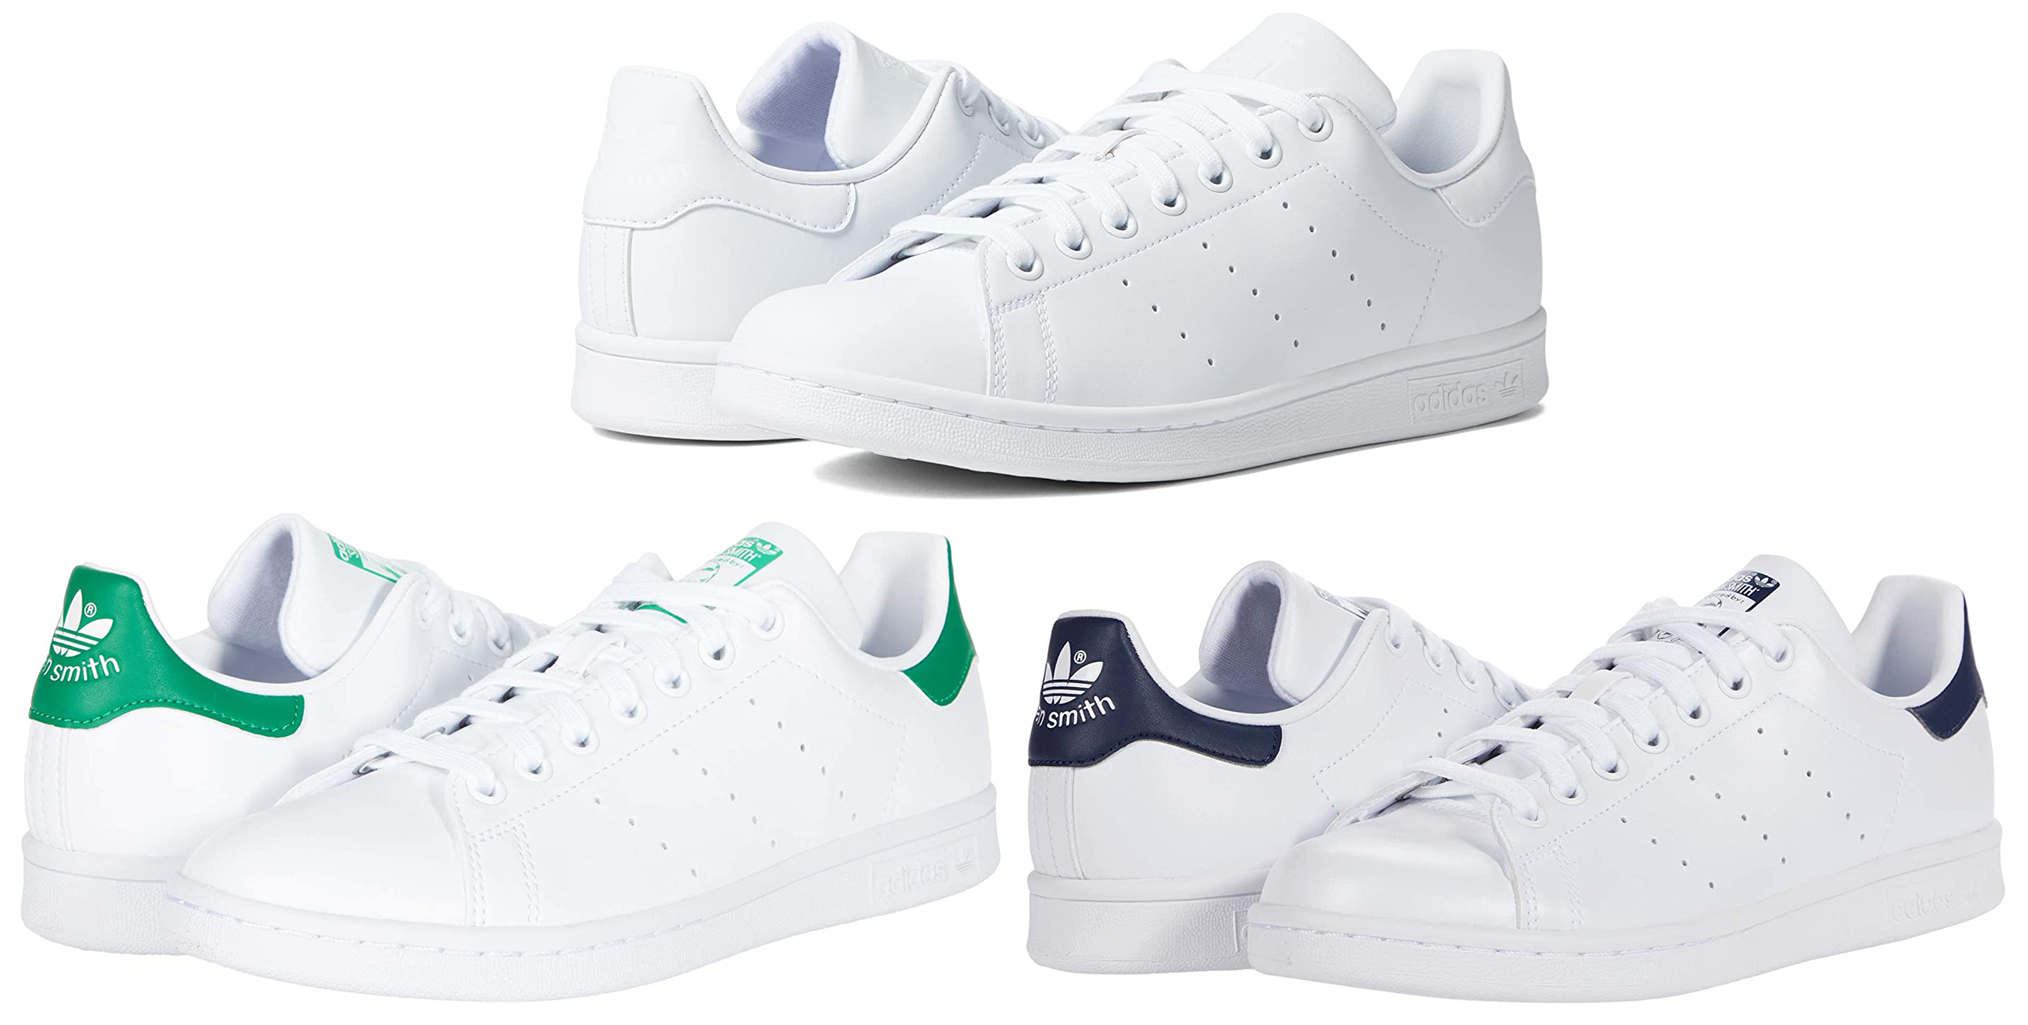 Style your streetwear or lunch date couple OOTD with the versatile Adidas Originals Stan Smith